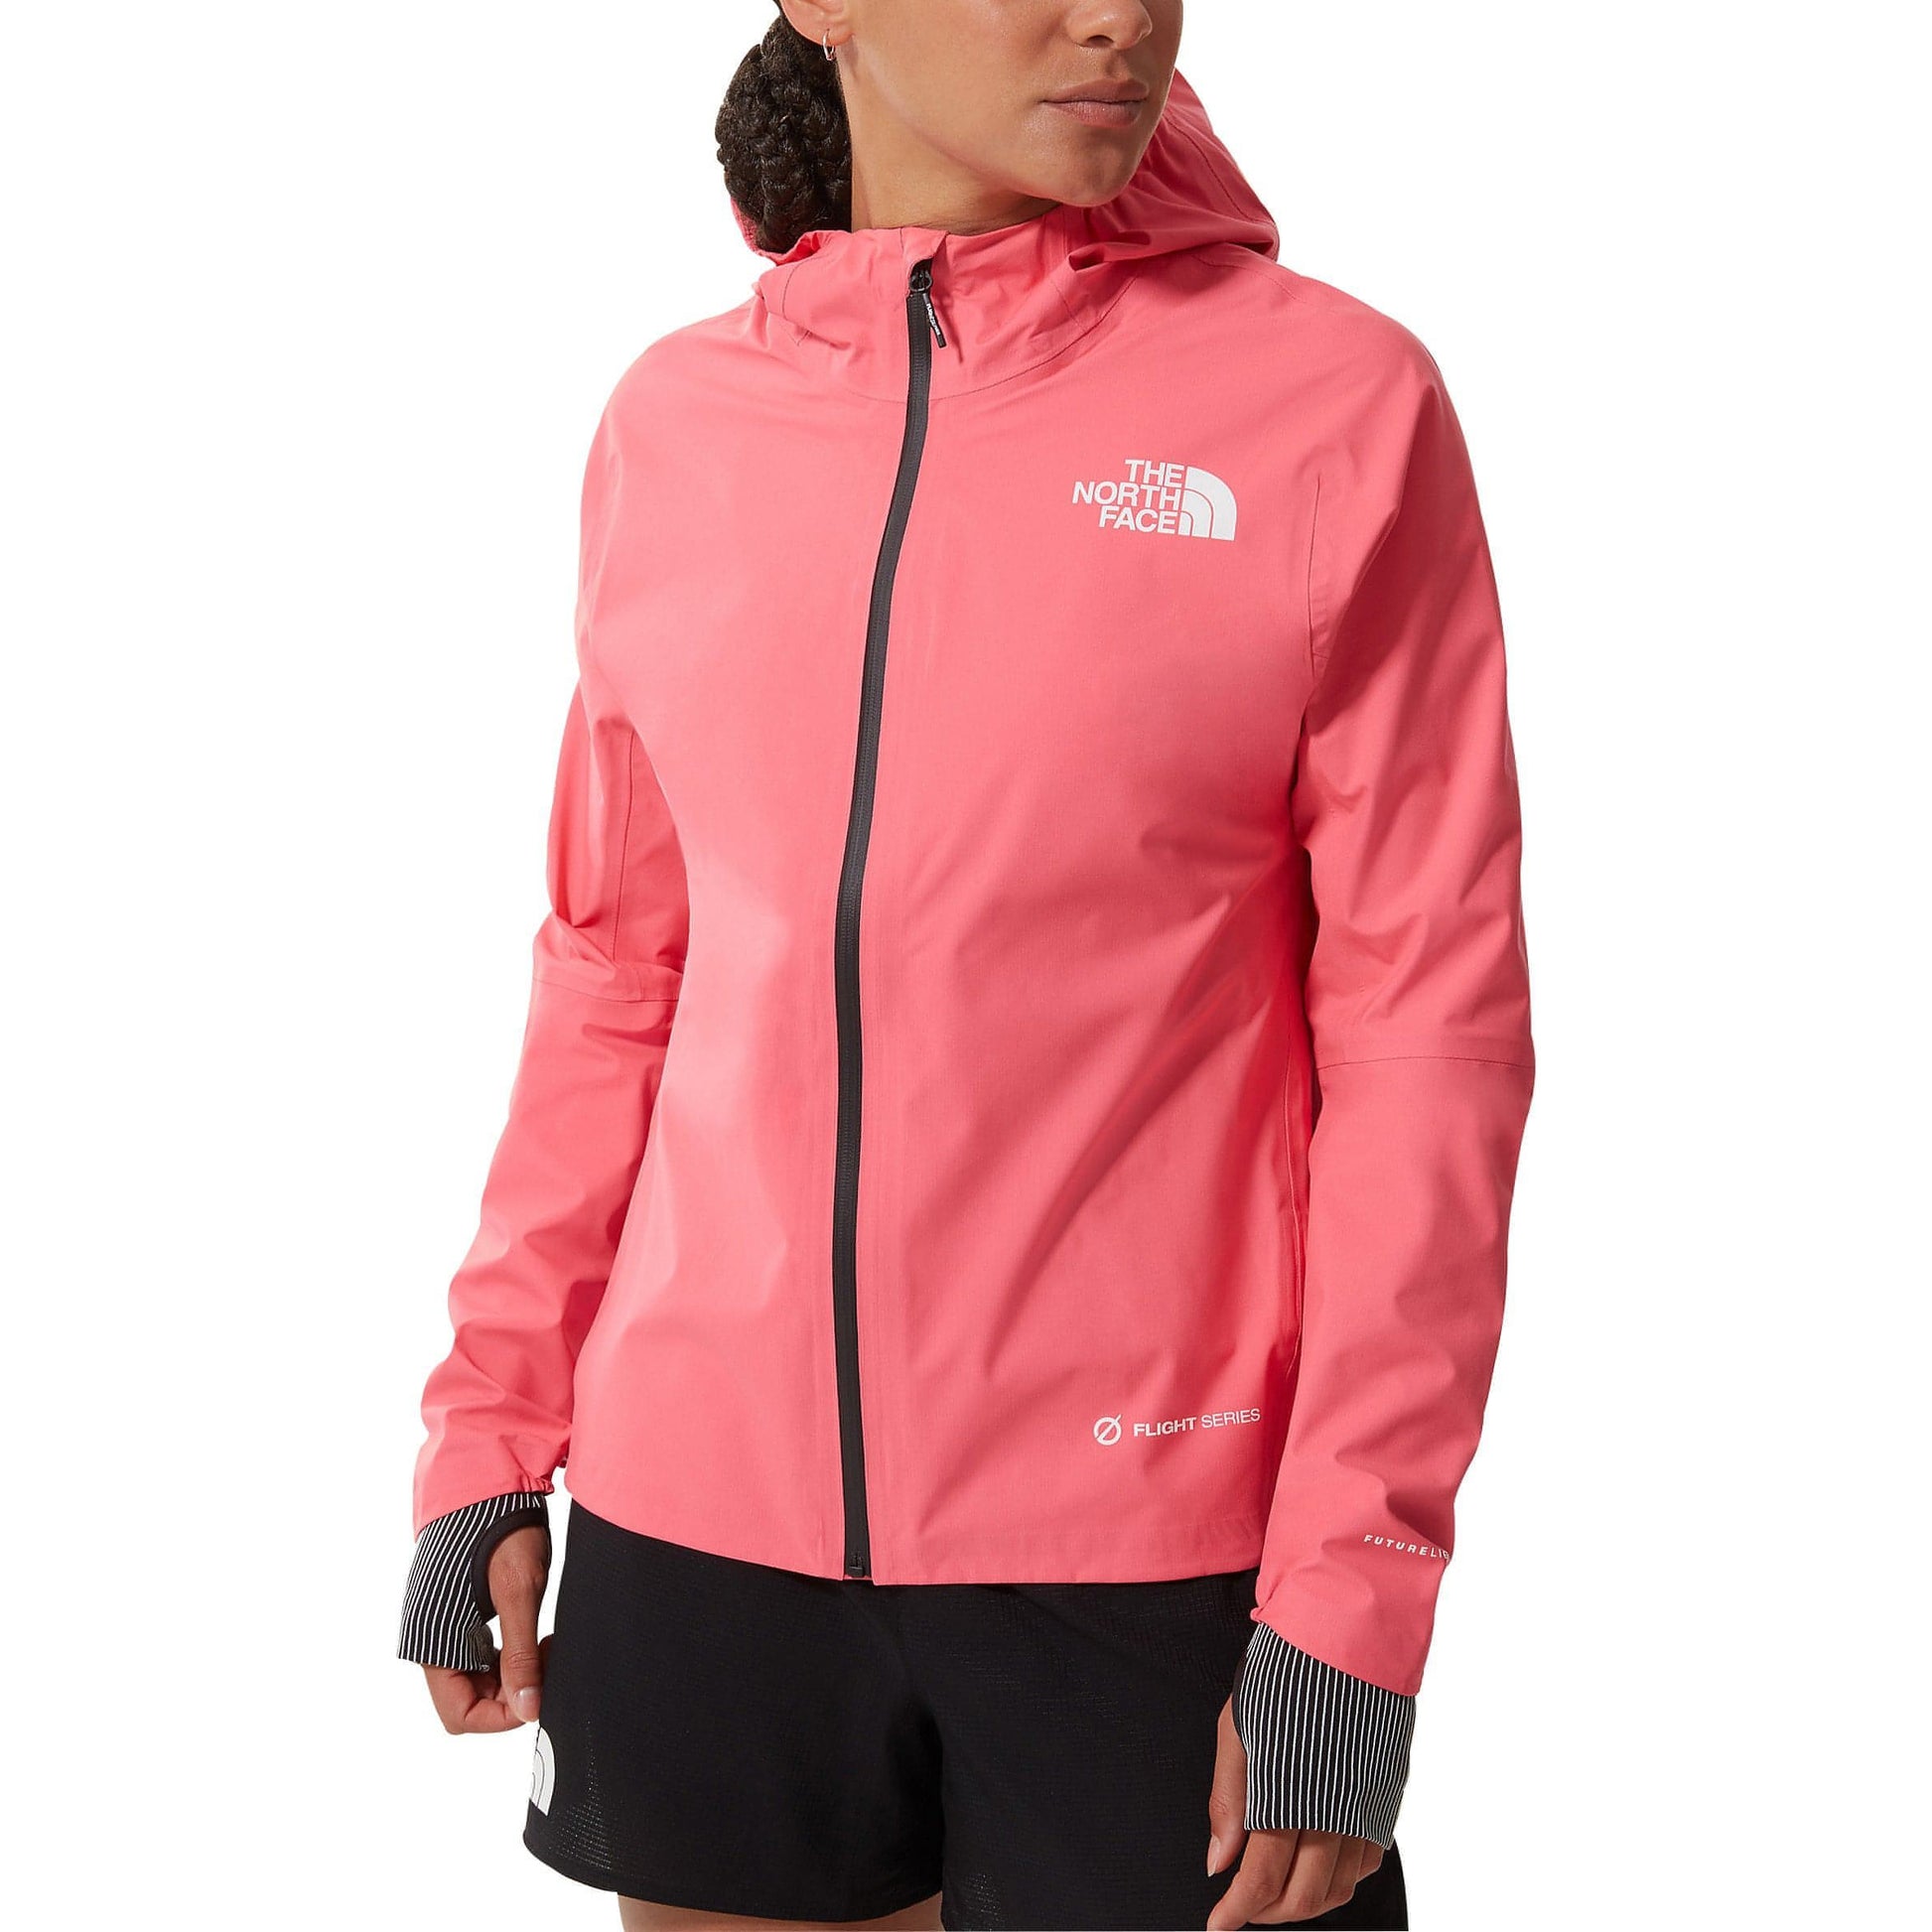 The North Face Futurelight Flight Series Jacket Full Review 